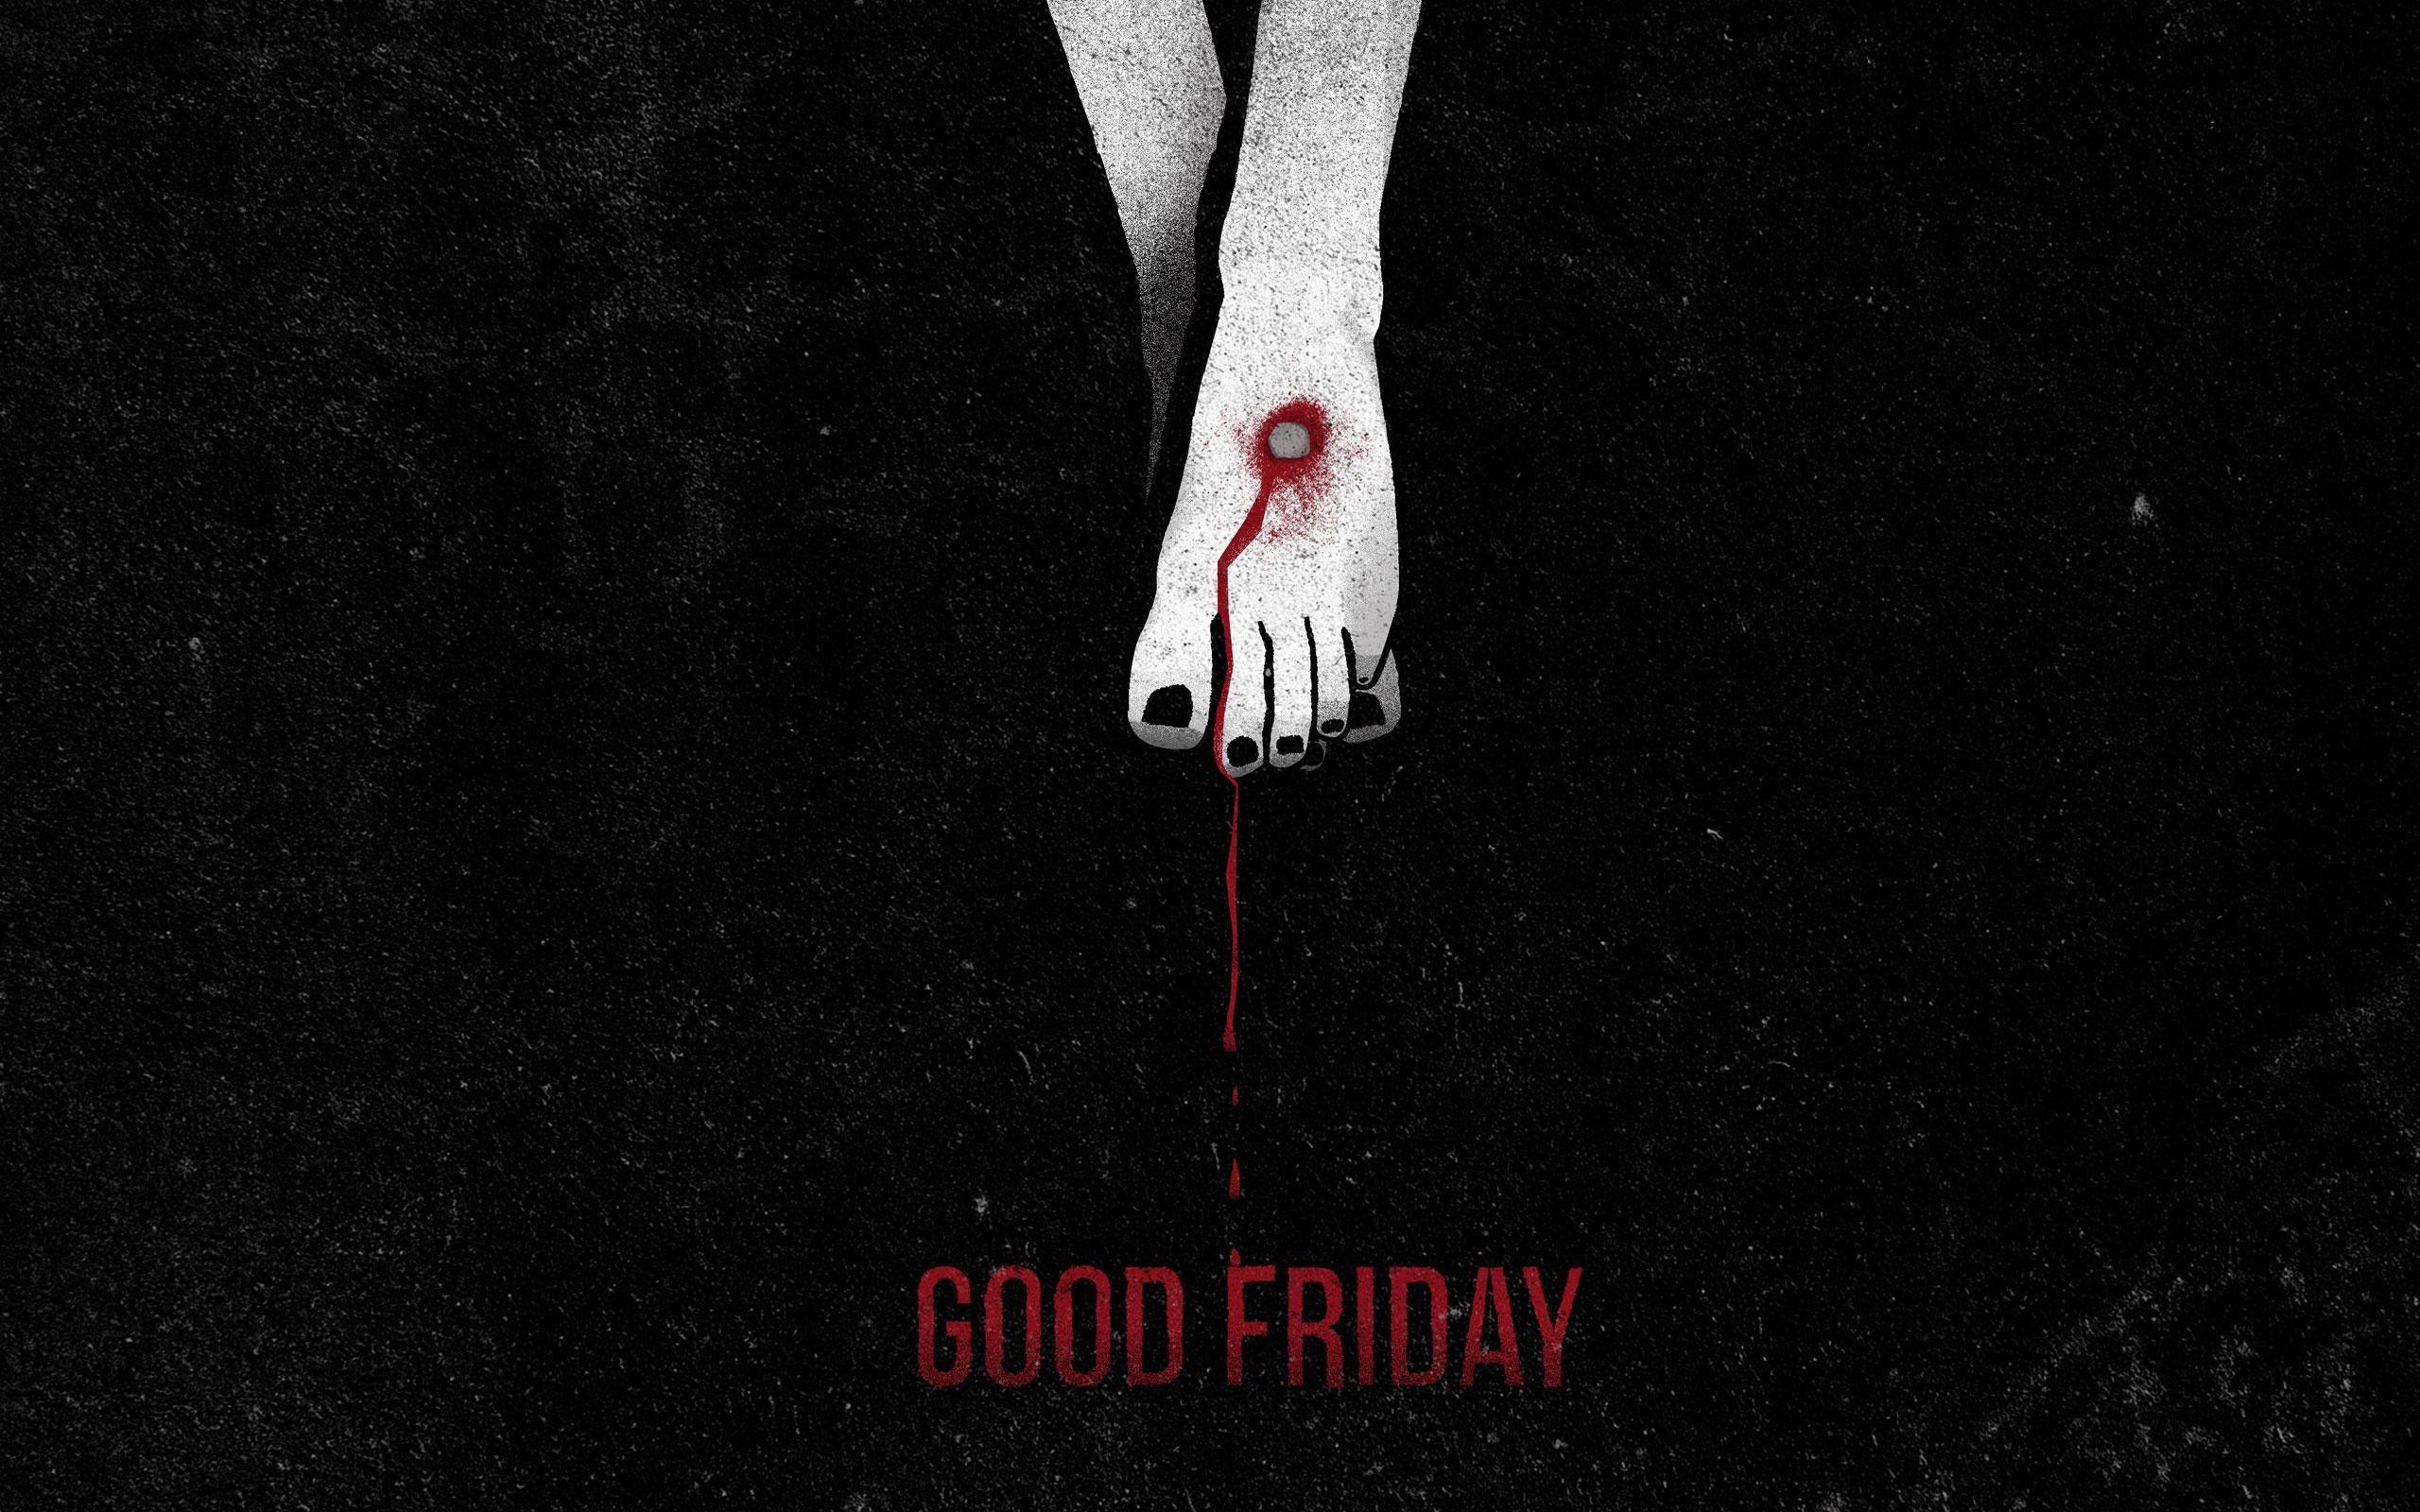 TOP +} Good Friday 2018 Quotes messages wishes. Good Friday